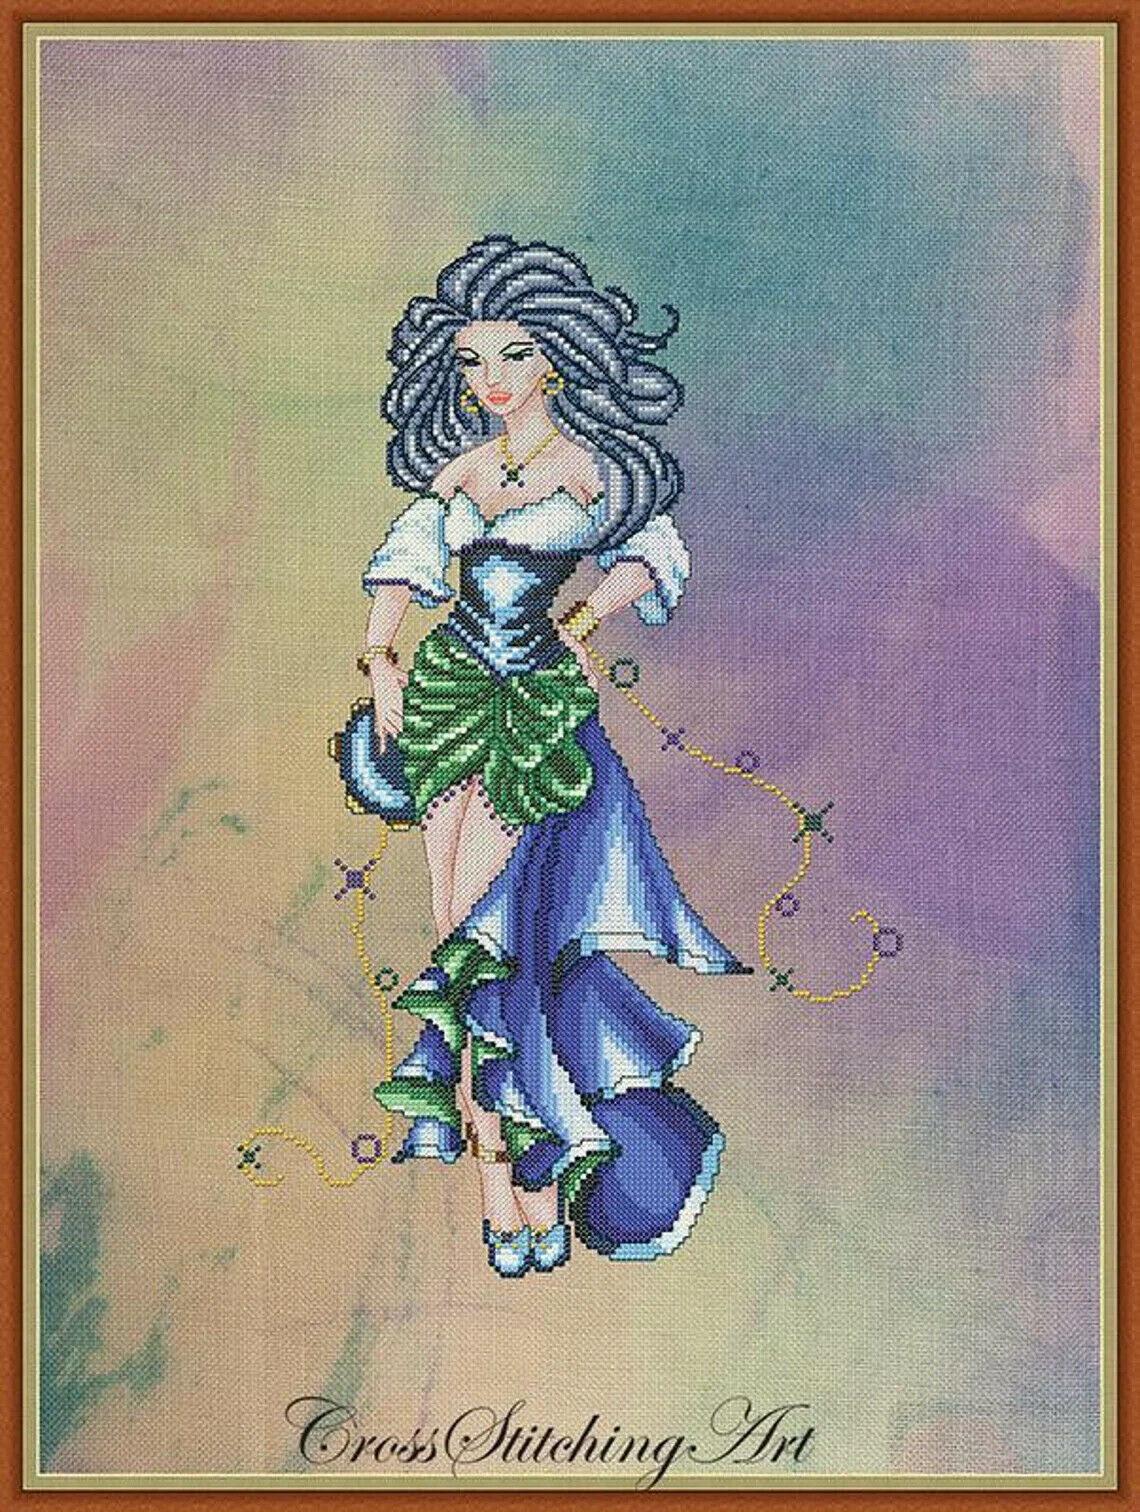 SALE! Complete Xstitch materials DANCE of EMERALD -By Cross Stitching Art Design - $64.34 - $74.24